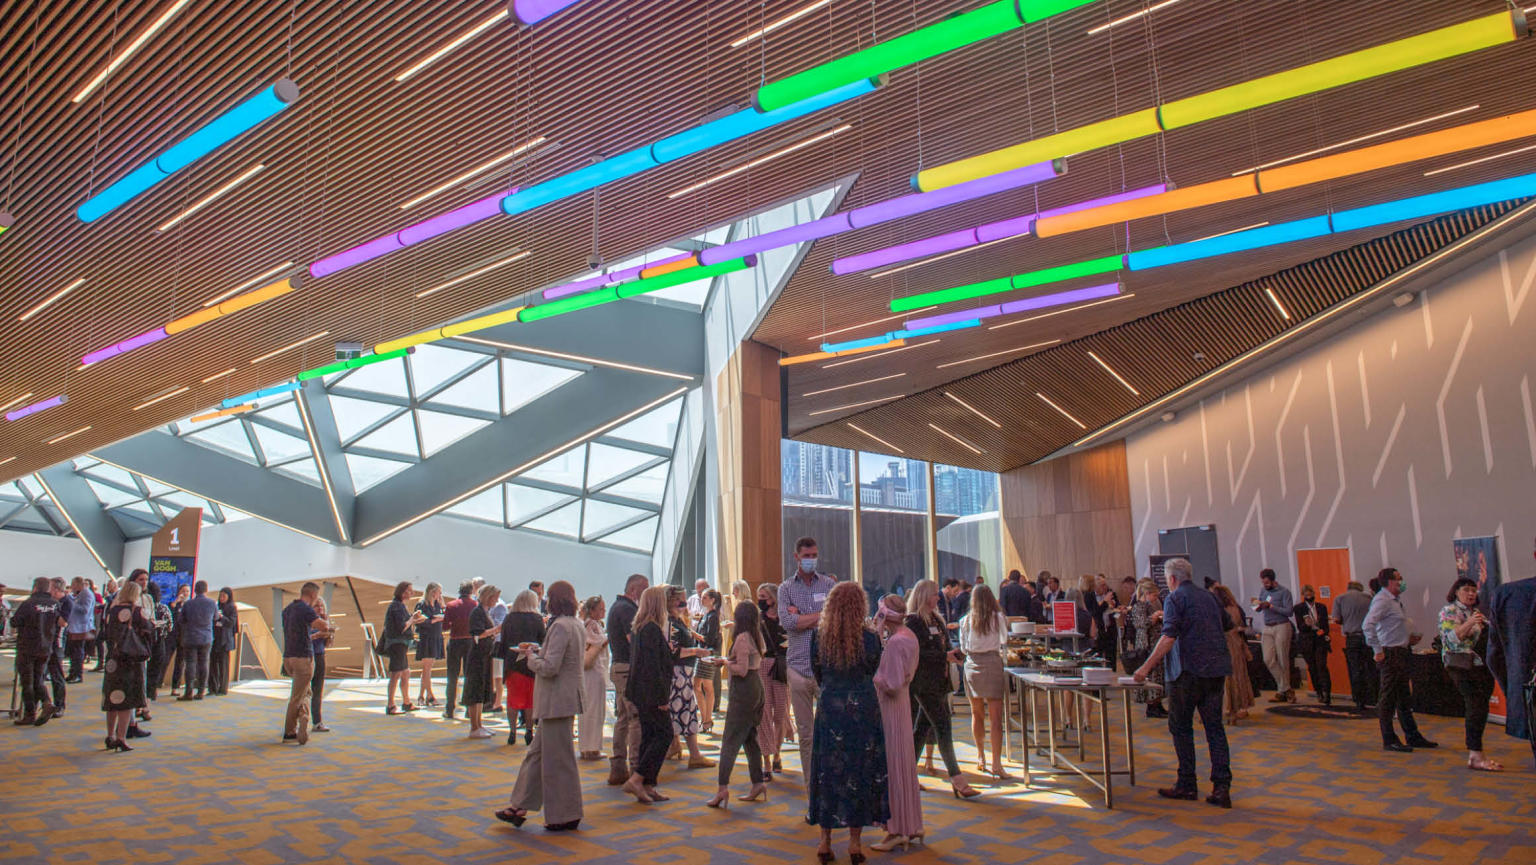 A lively foyer filled with a diverse crowd engaged in conversation and mingling. Overhead, vibrant bars of multi-coloured lights in shades of blue, purple, green, yellow, and orange hang from the ceiling.